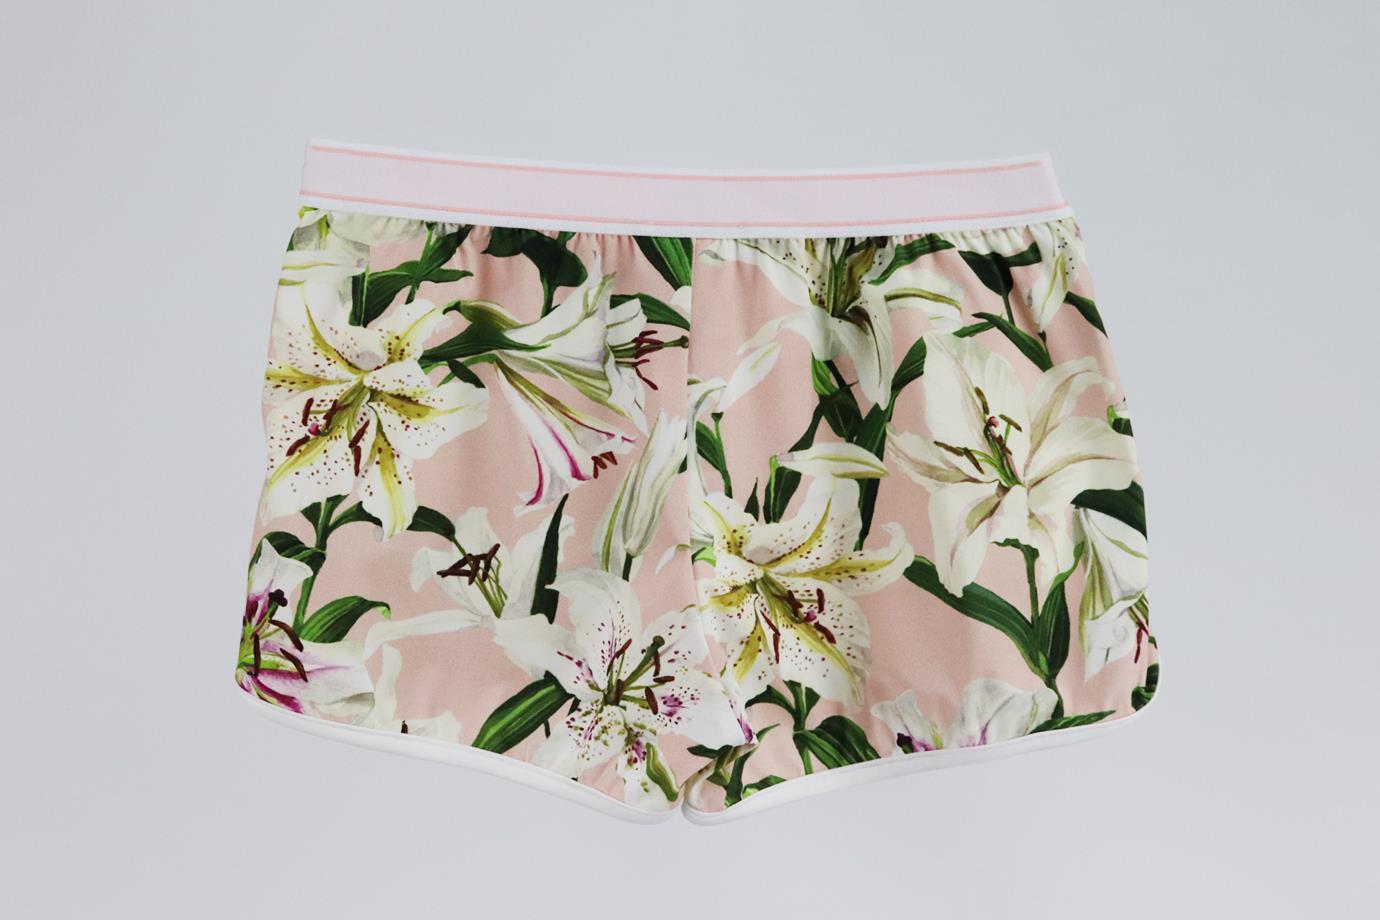 DOLCE AND GABBANA KIDS GIRLS FLORAL SHORTS 5 YEARS